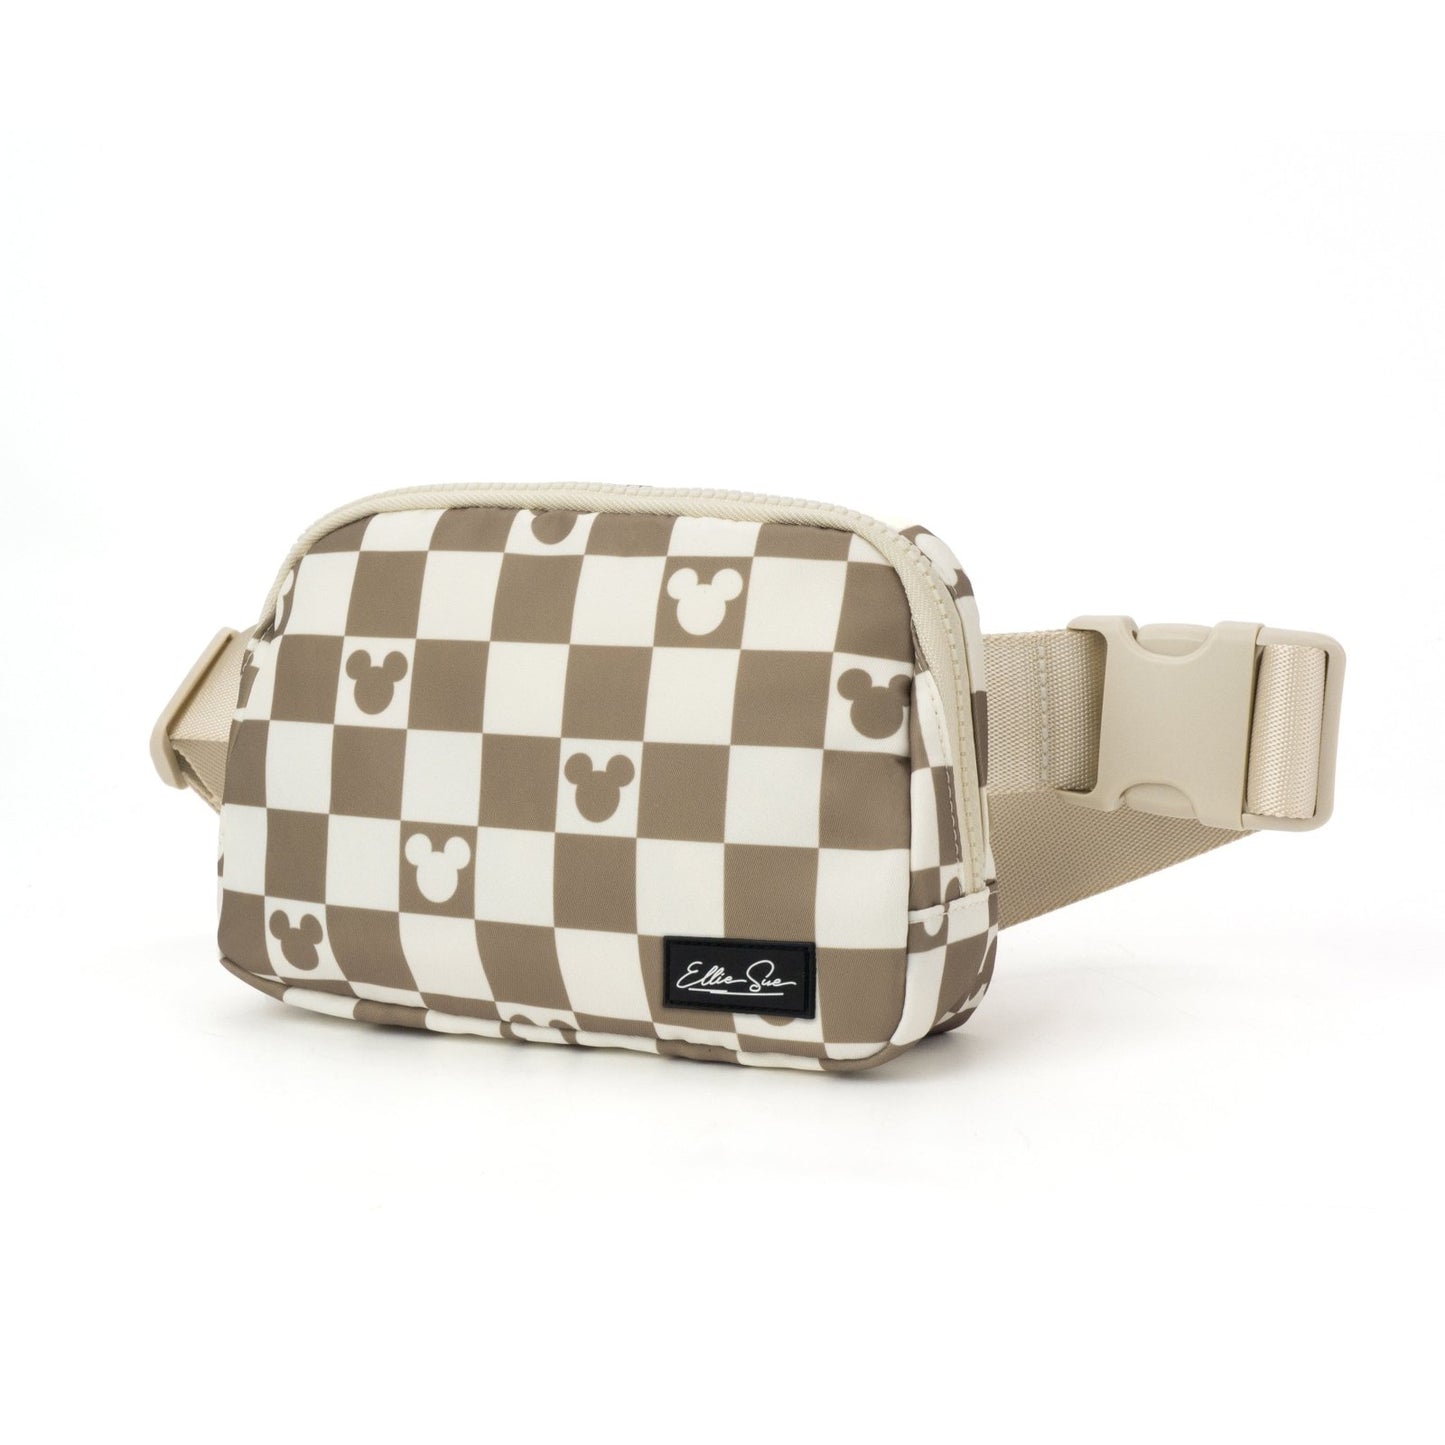 Woman with Gray and White Checkered Louis Vuitton Bag before